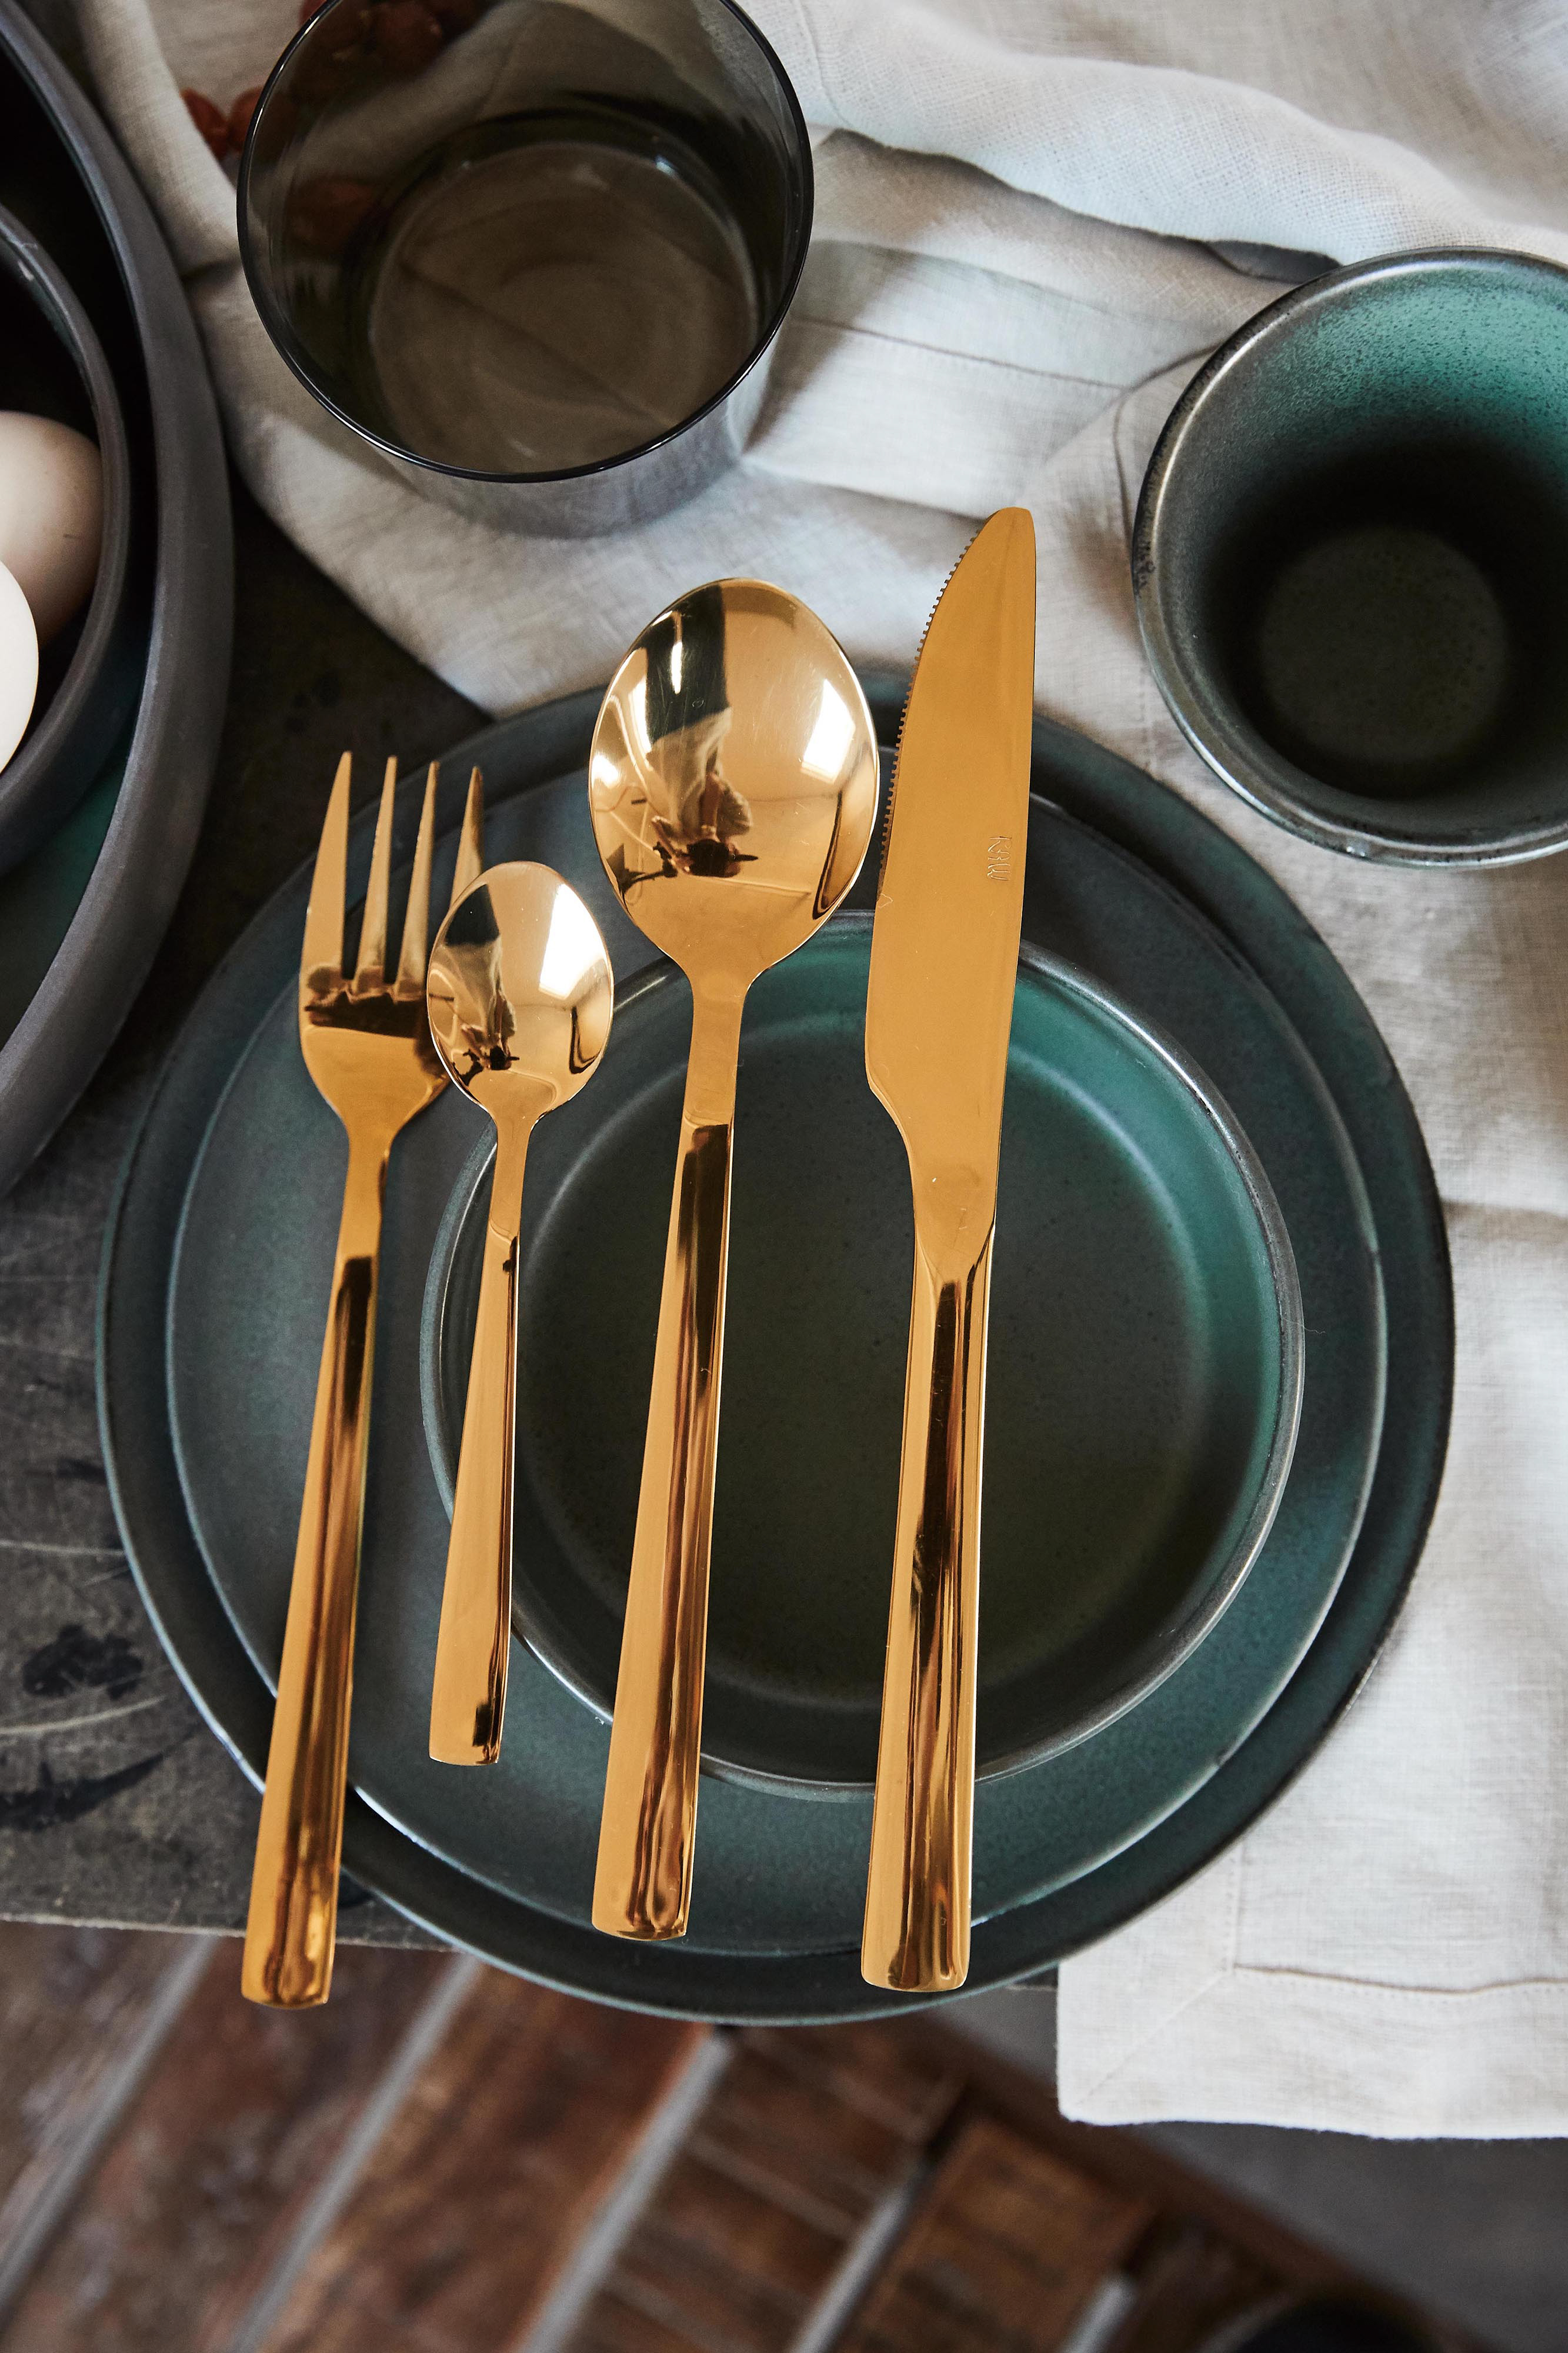 https://www.nordicnest.com/assets/blobs/aida-raw-cutlery-60-pieces-gold/501631-01_3_EnvironmentImage-03f275bc40.jpg